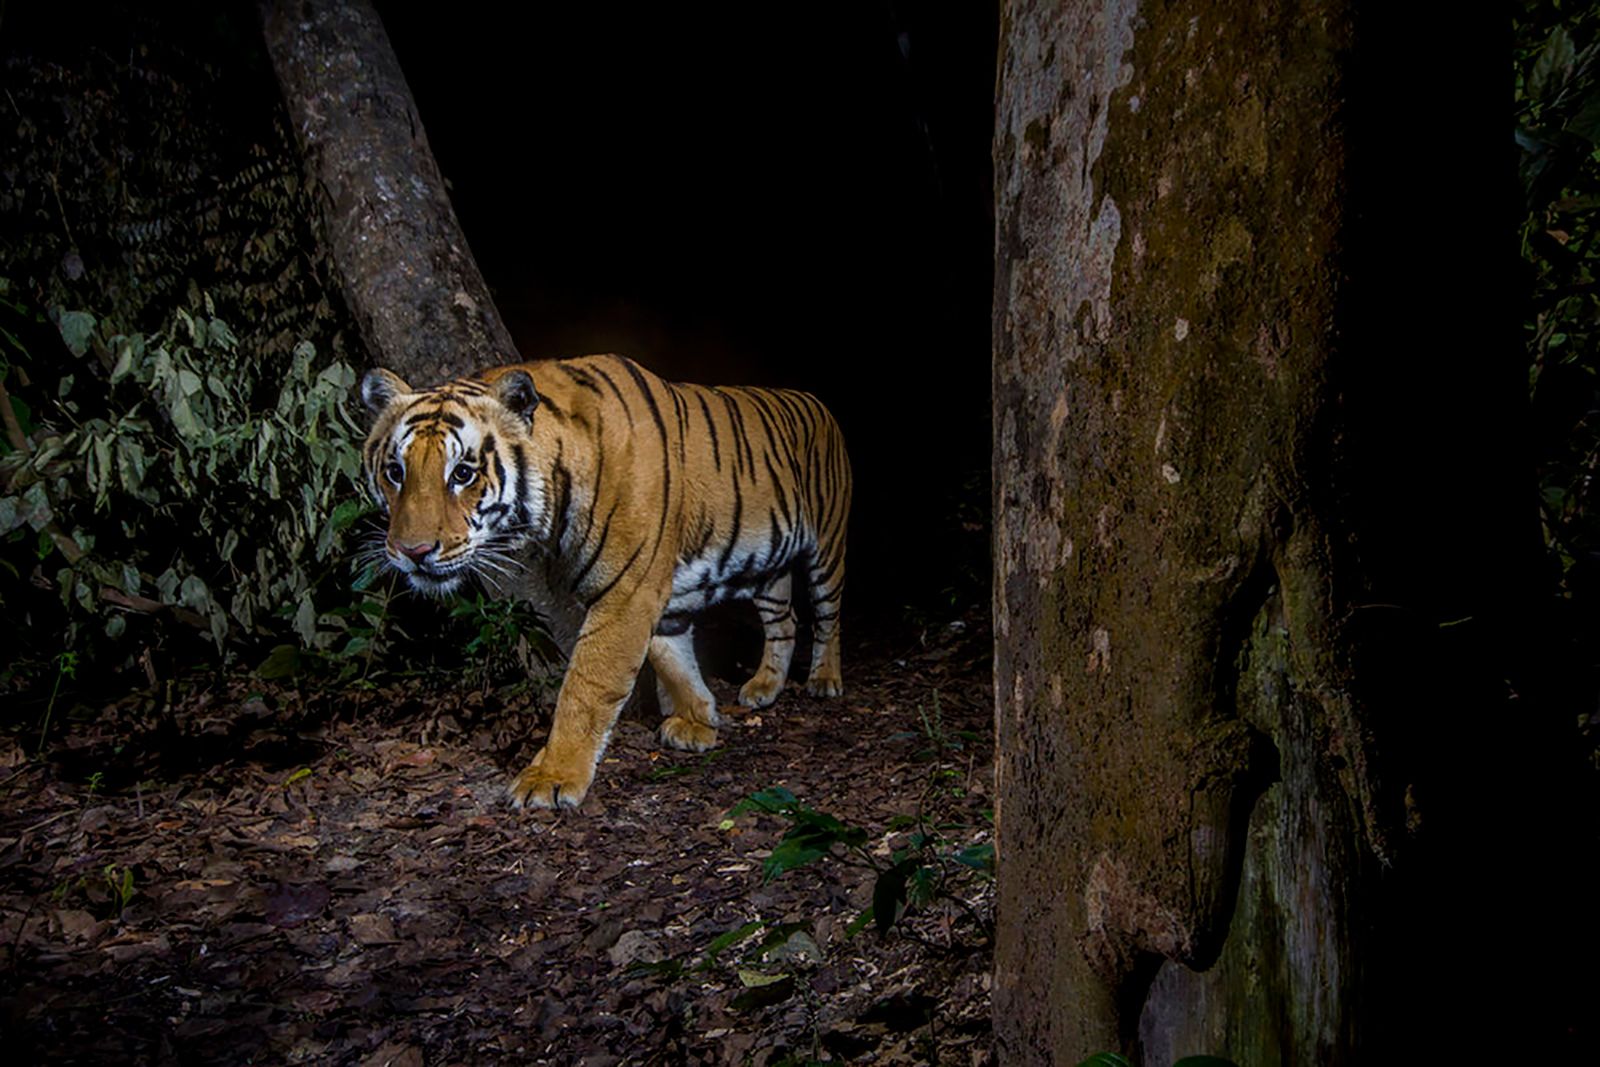 Nepal has nearly tripled its wild tiger population since 2009 | CNN